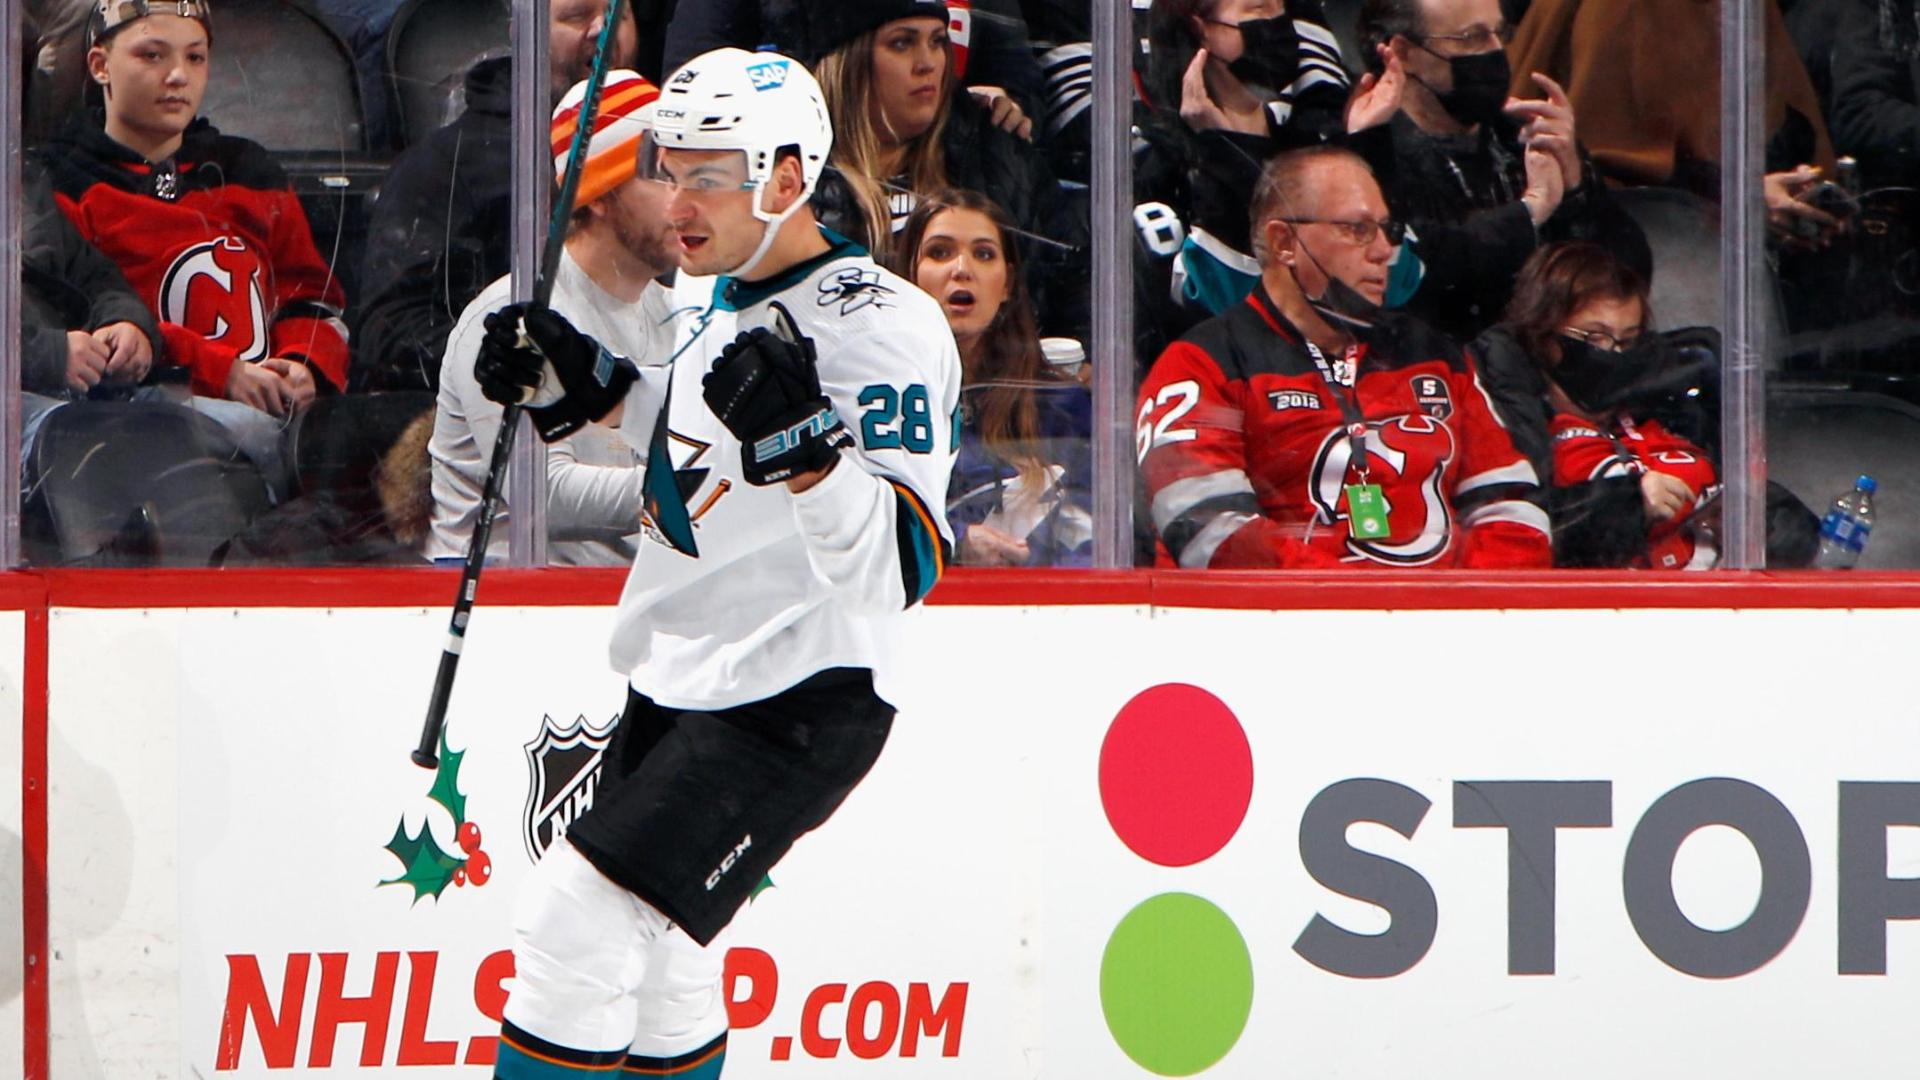 Meier scores pair of goals to lead Sharks to victory